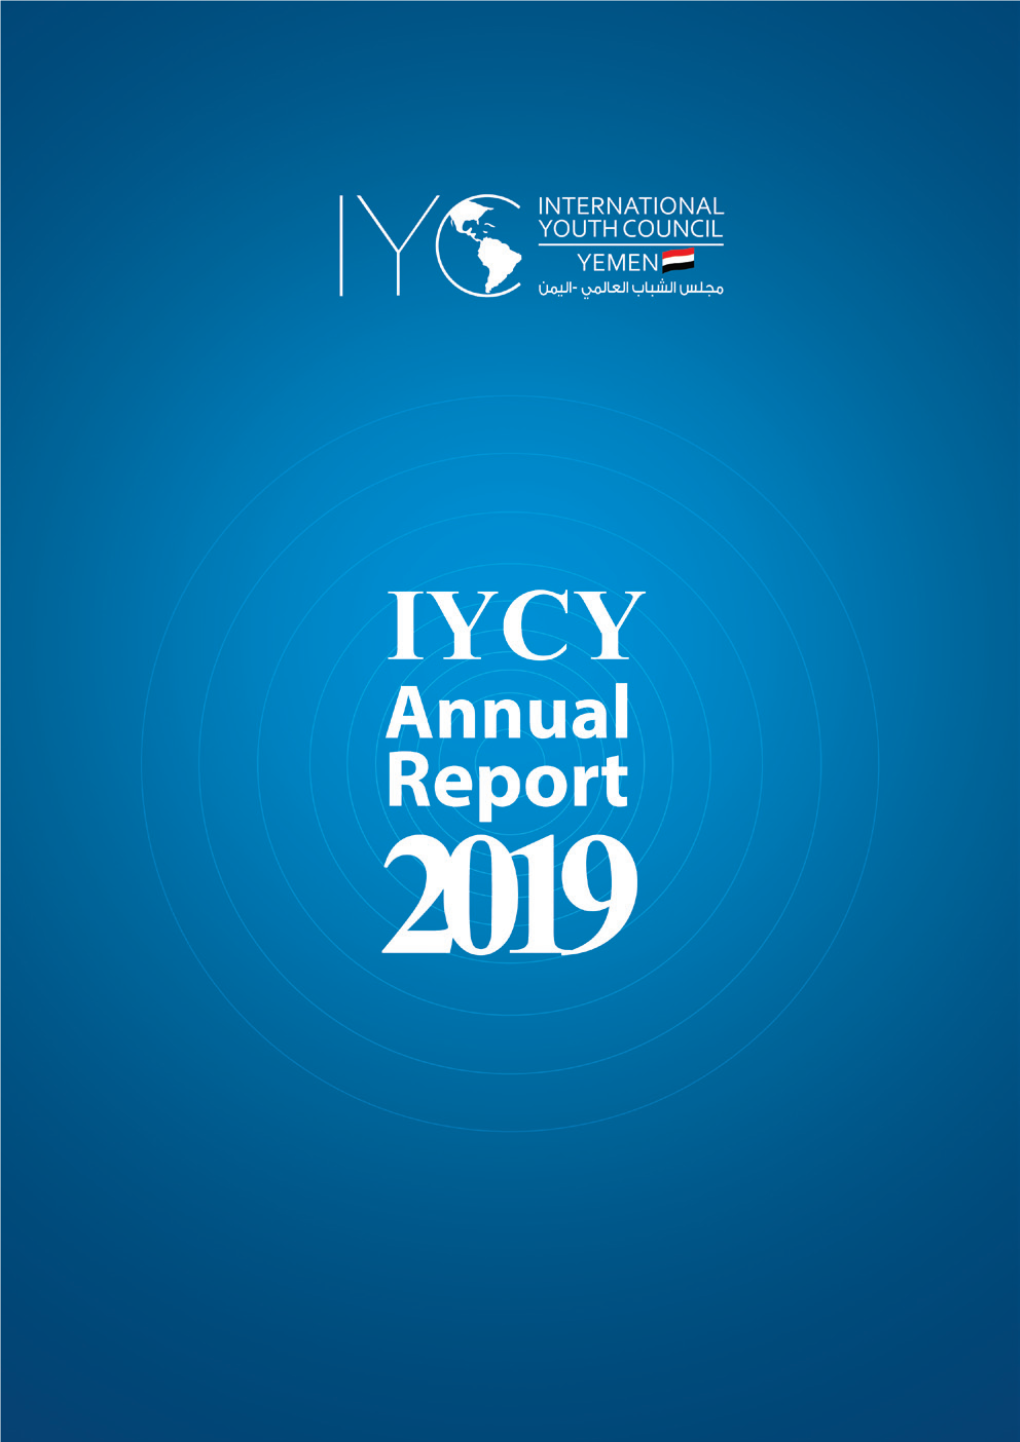 IYCY Annual Report 2019-1.Pdf